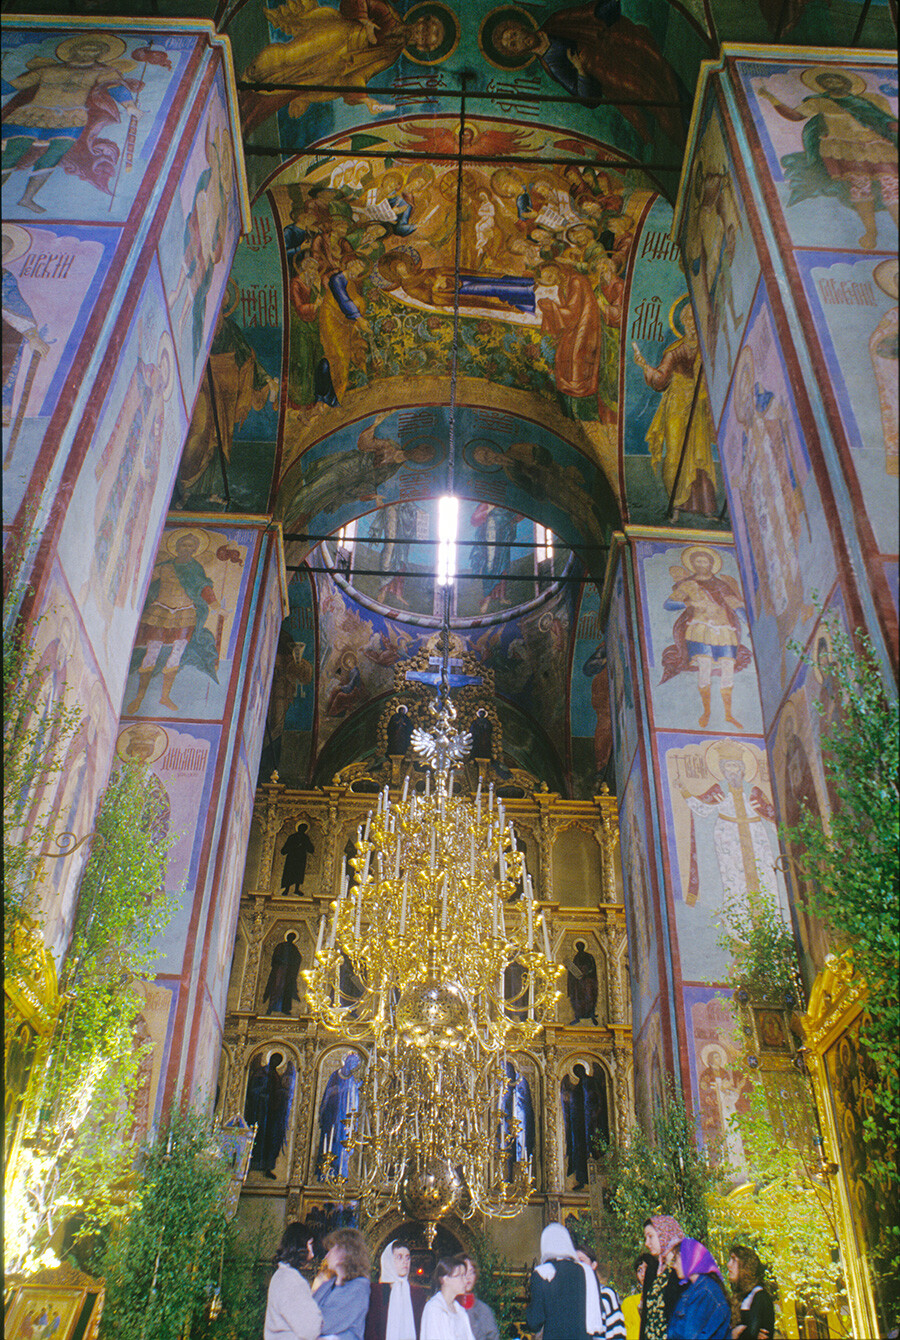 Trinity-St. Sergius Monastery. Dormition Cathedral. Central aisle with candelabra, view east toward icon screen & central dome. Fresco of Dormition of Mary on ceiling vault. May 29, 1999